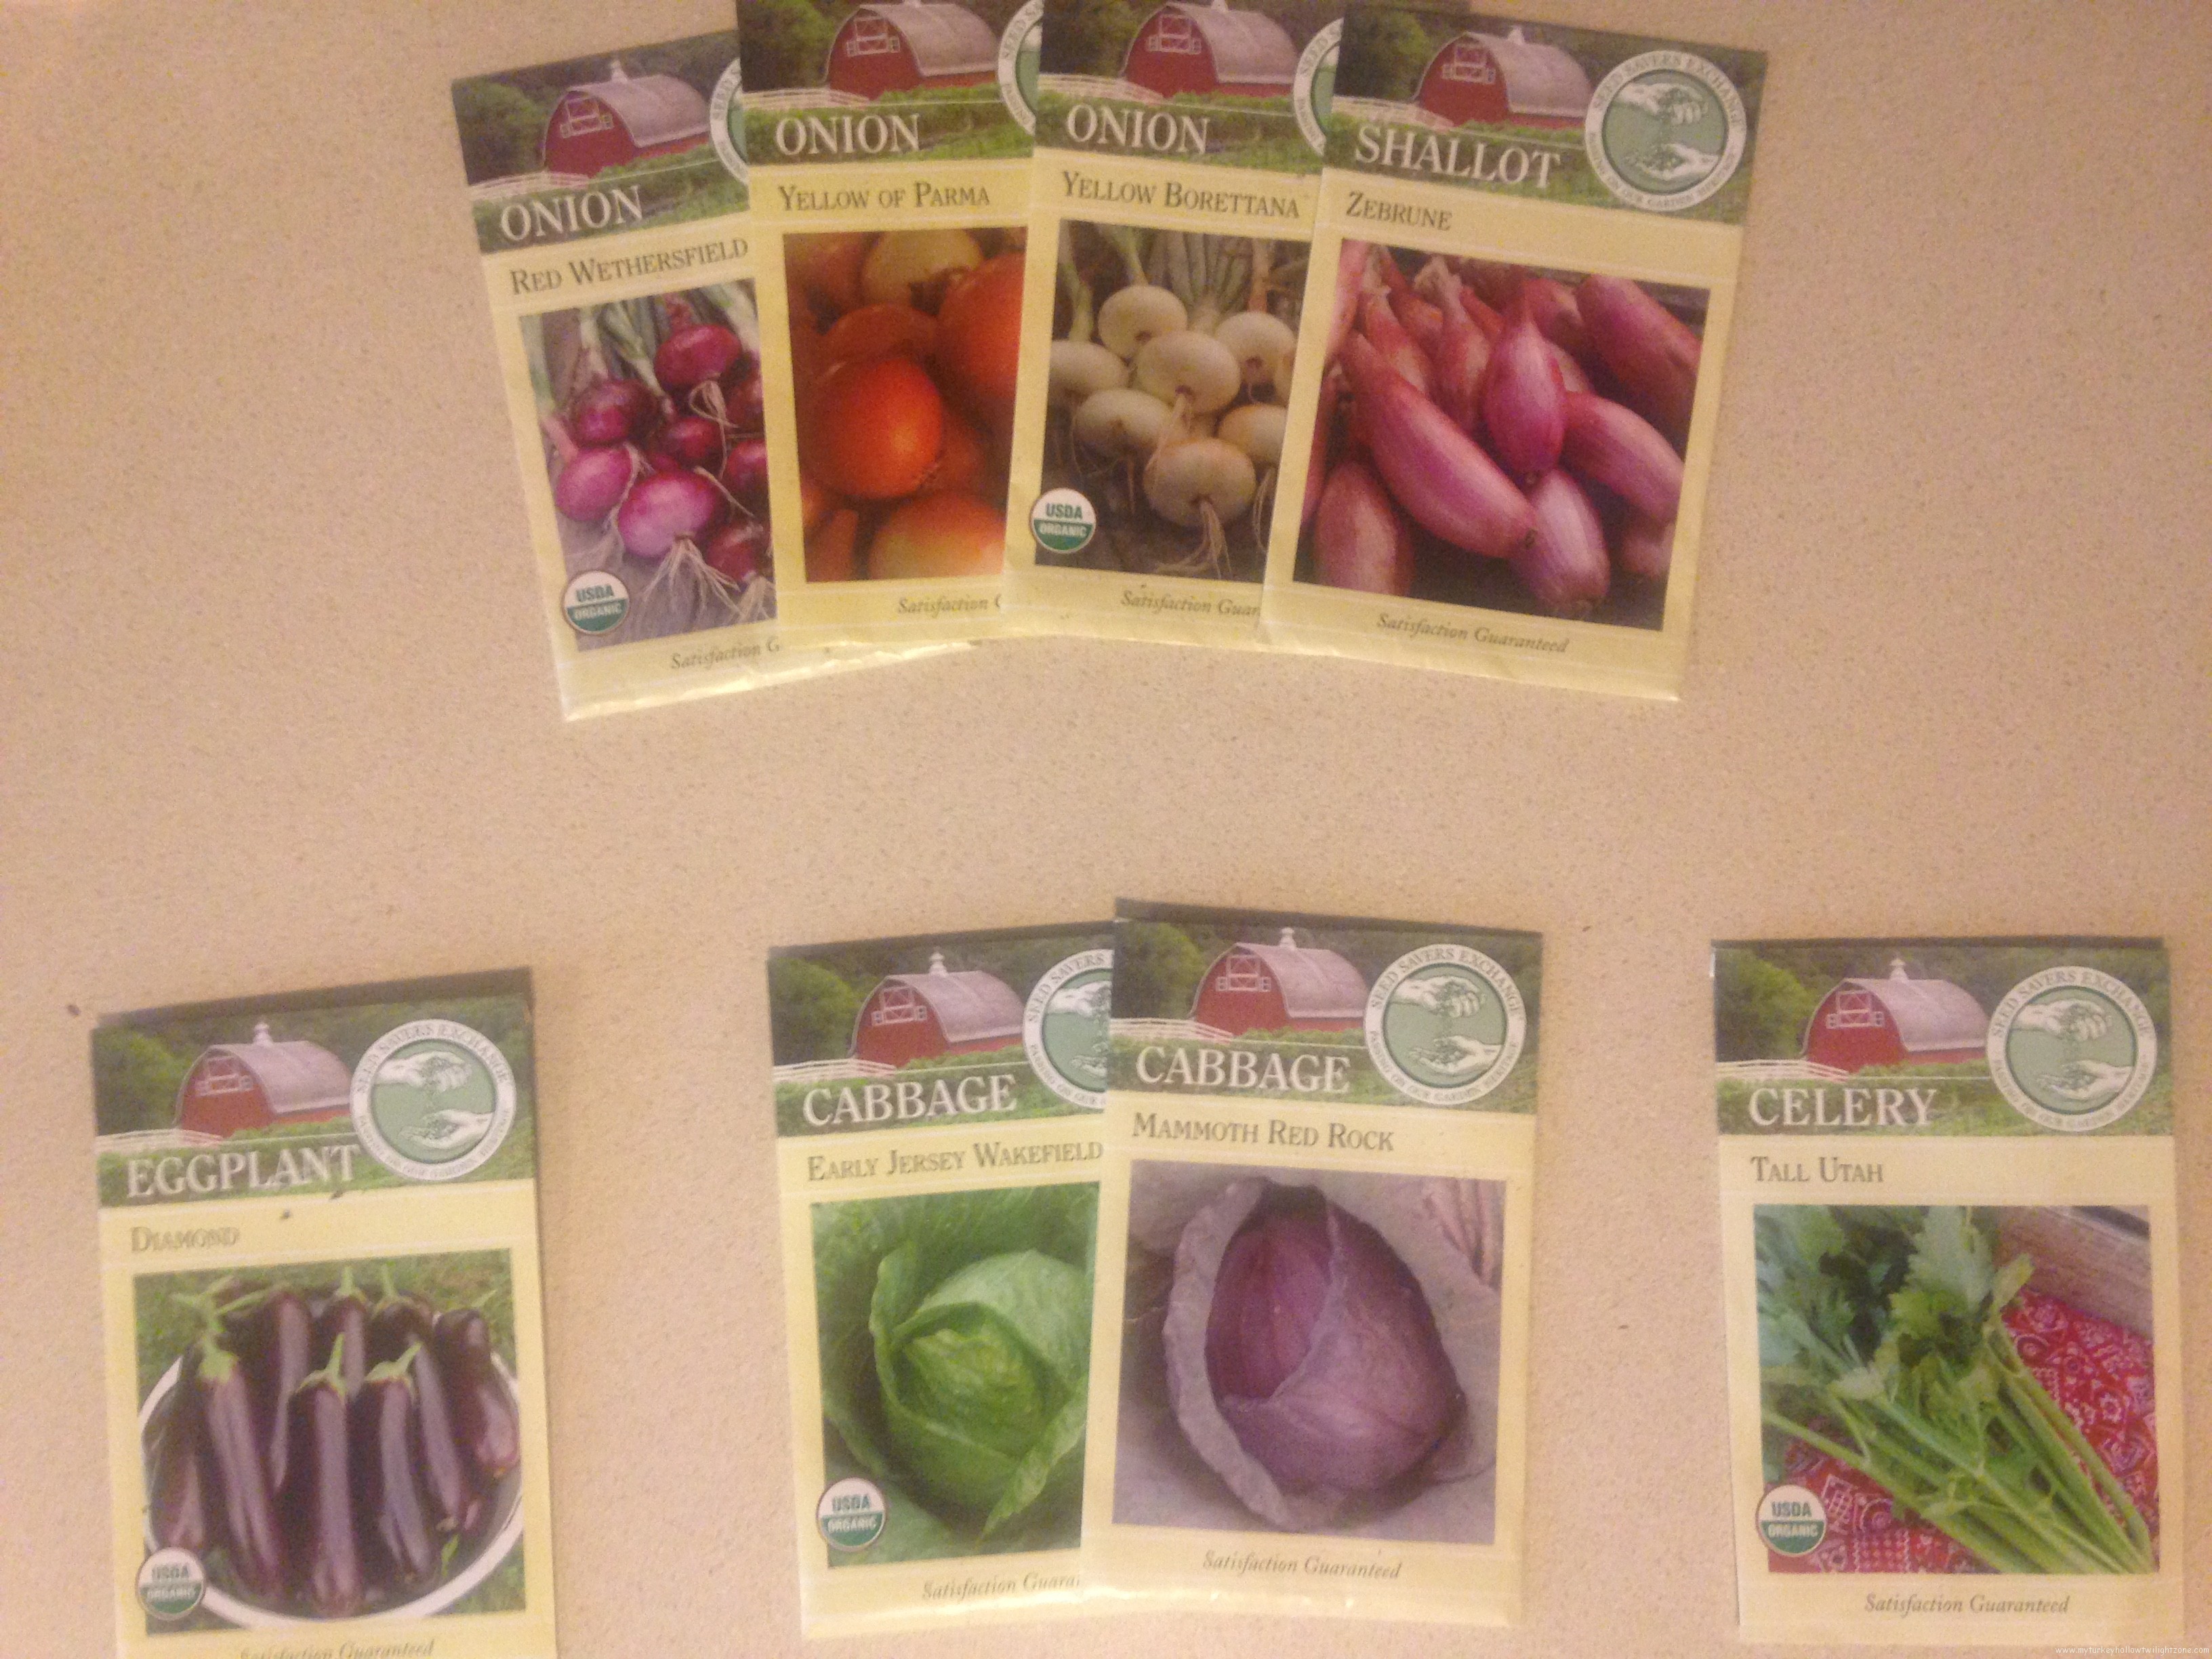 Buying From Seed Savers Exchange